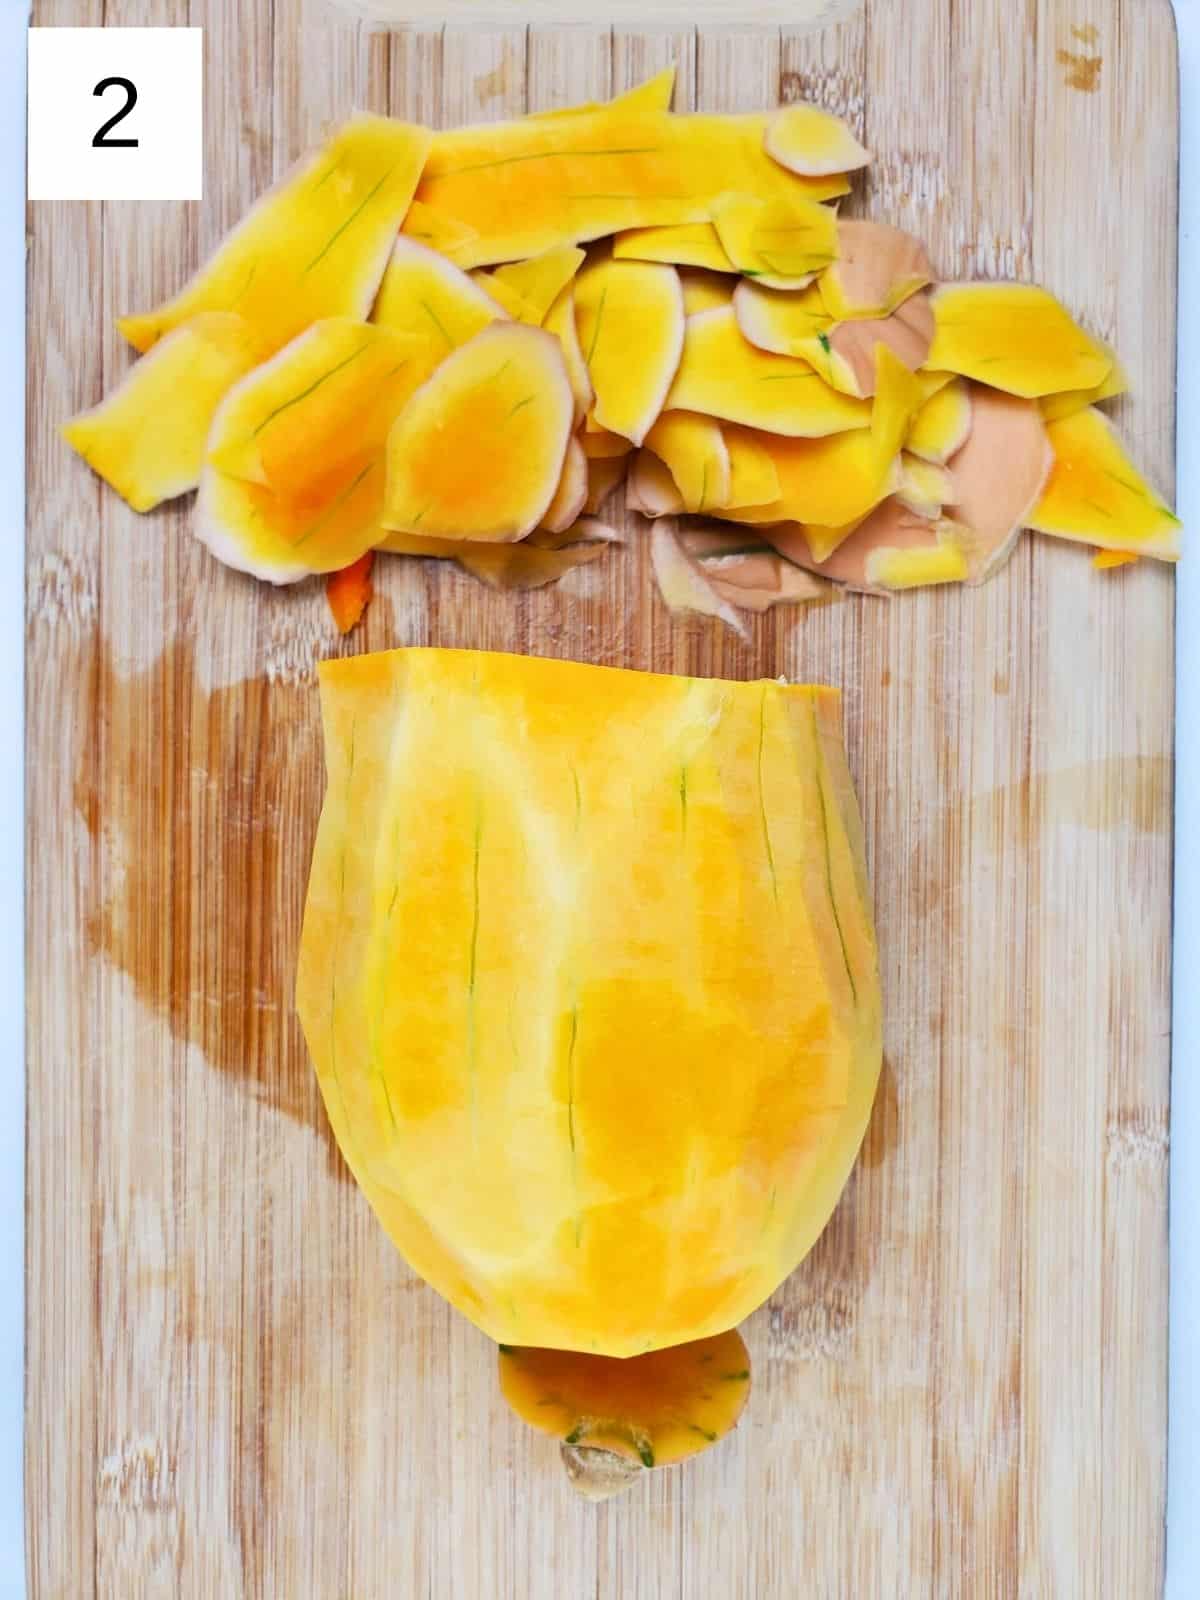 peeled half of butternut squash on a wooden chopping board.